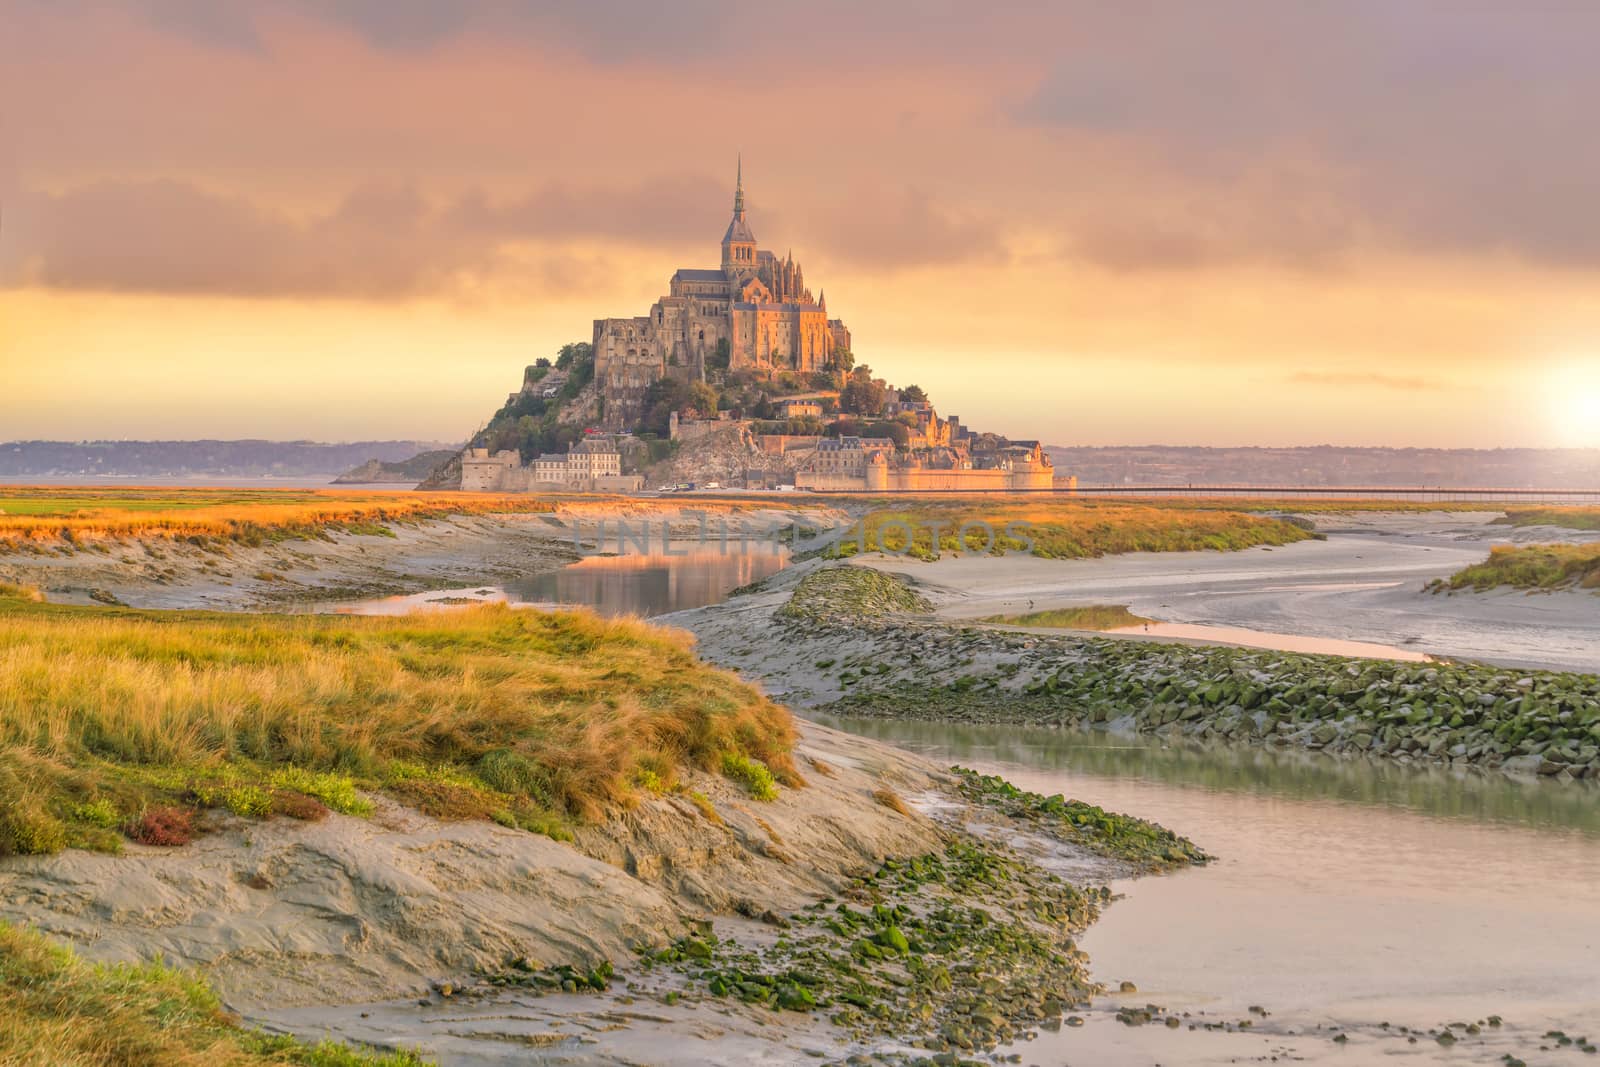 Mont Saint-Michel at sunset twilight in Normandy, northern France